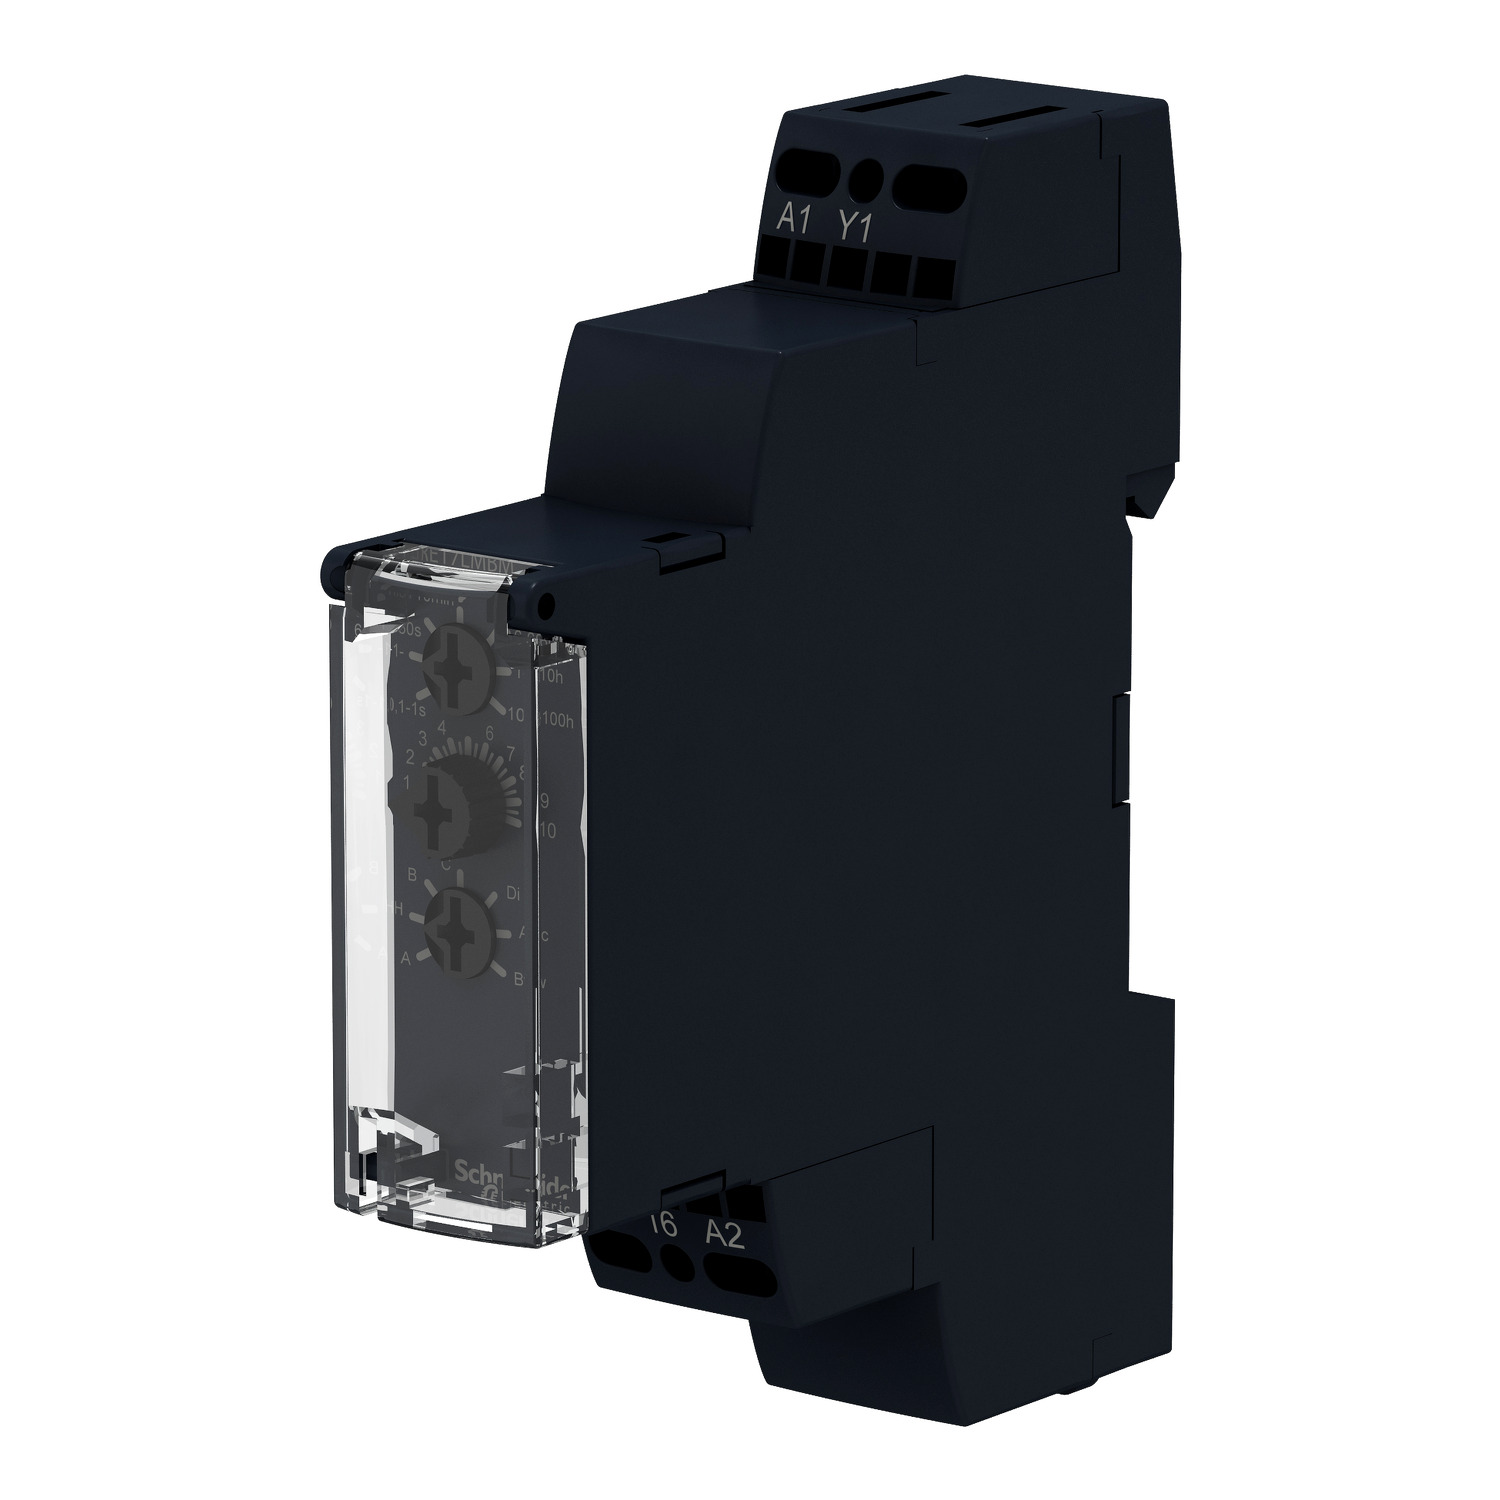 RE17LMBM - Modular timing relay, Harmony, 0.7A, 1s..100h, multifunction, solid state output, 24...240V AC | Schneider Electric Global